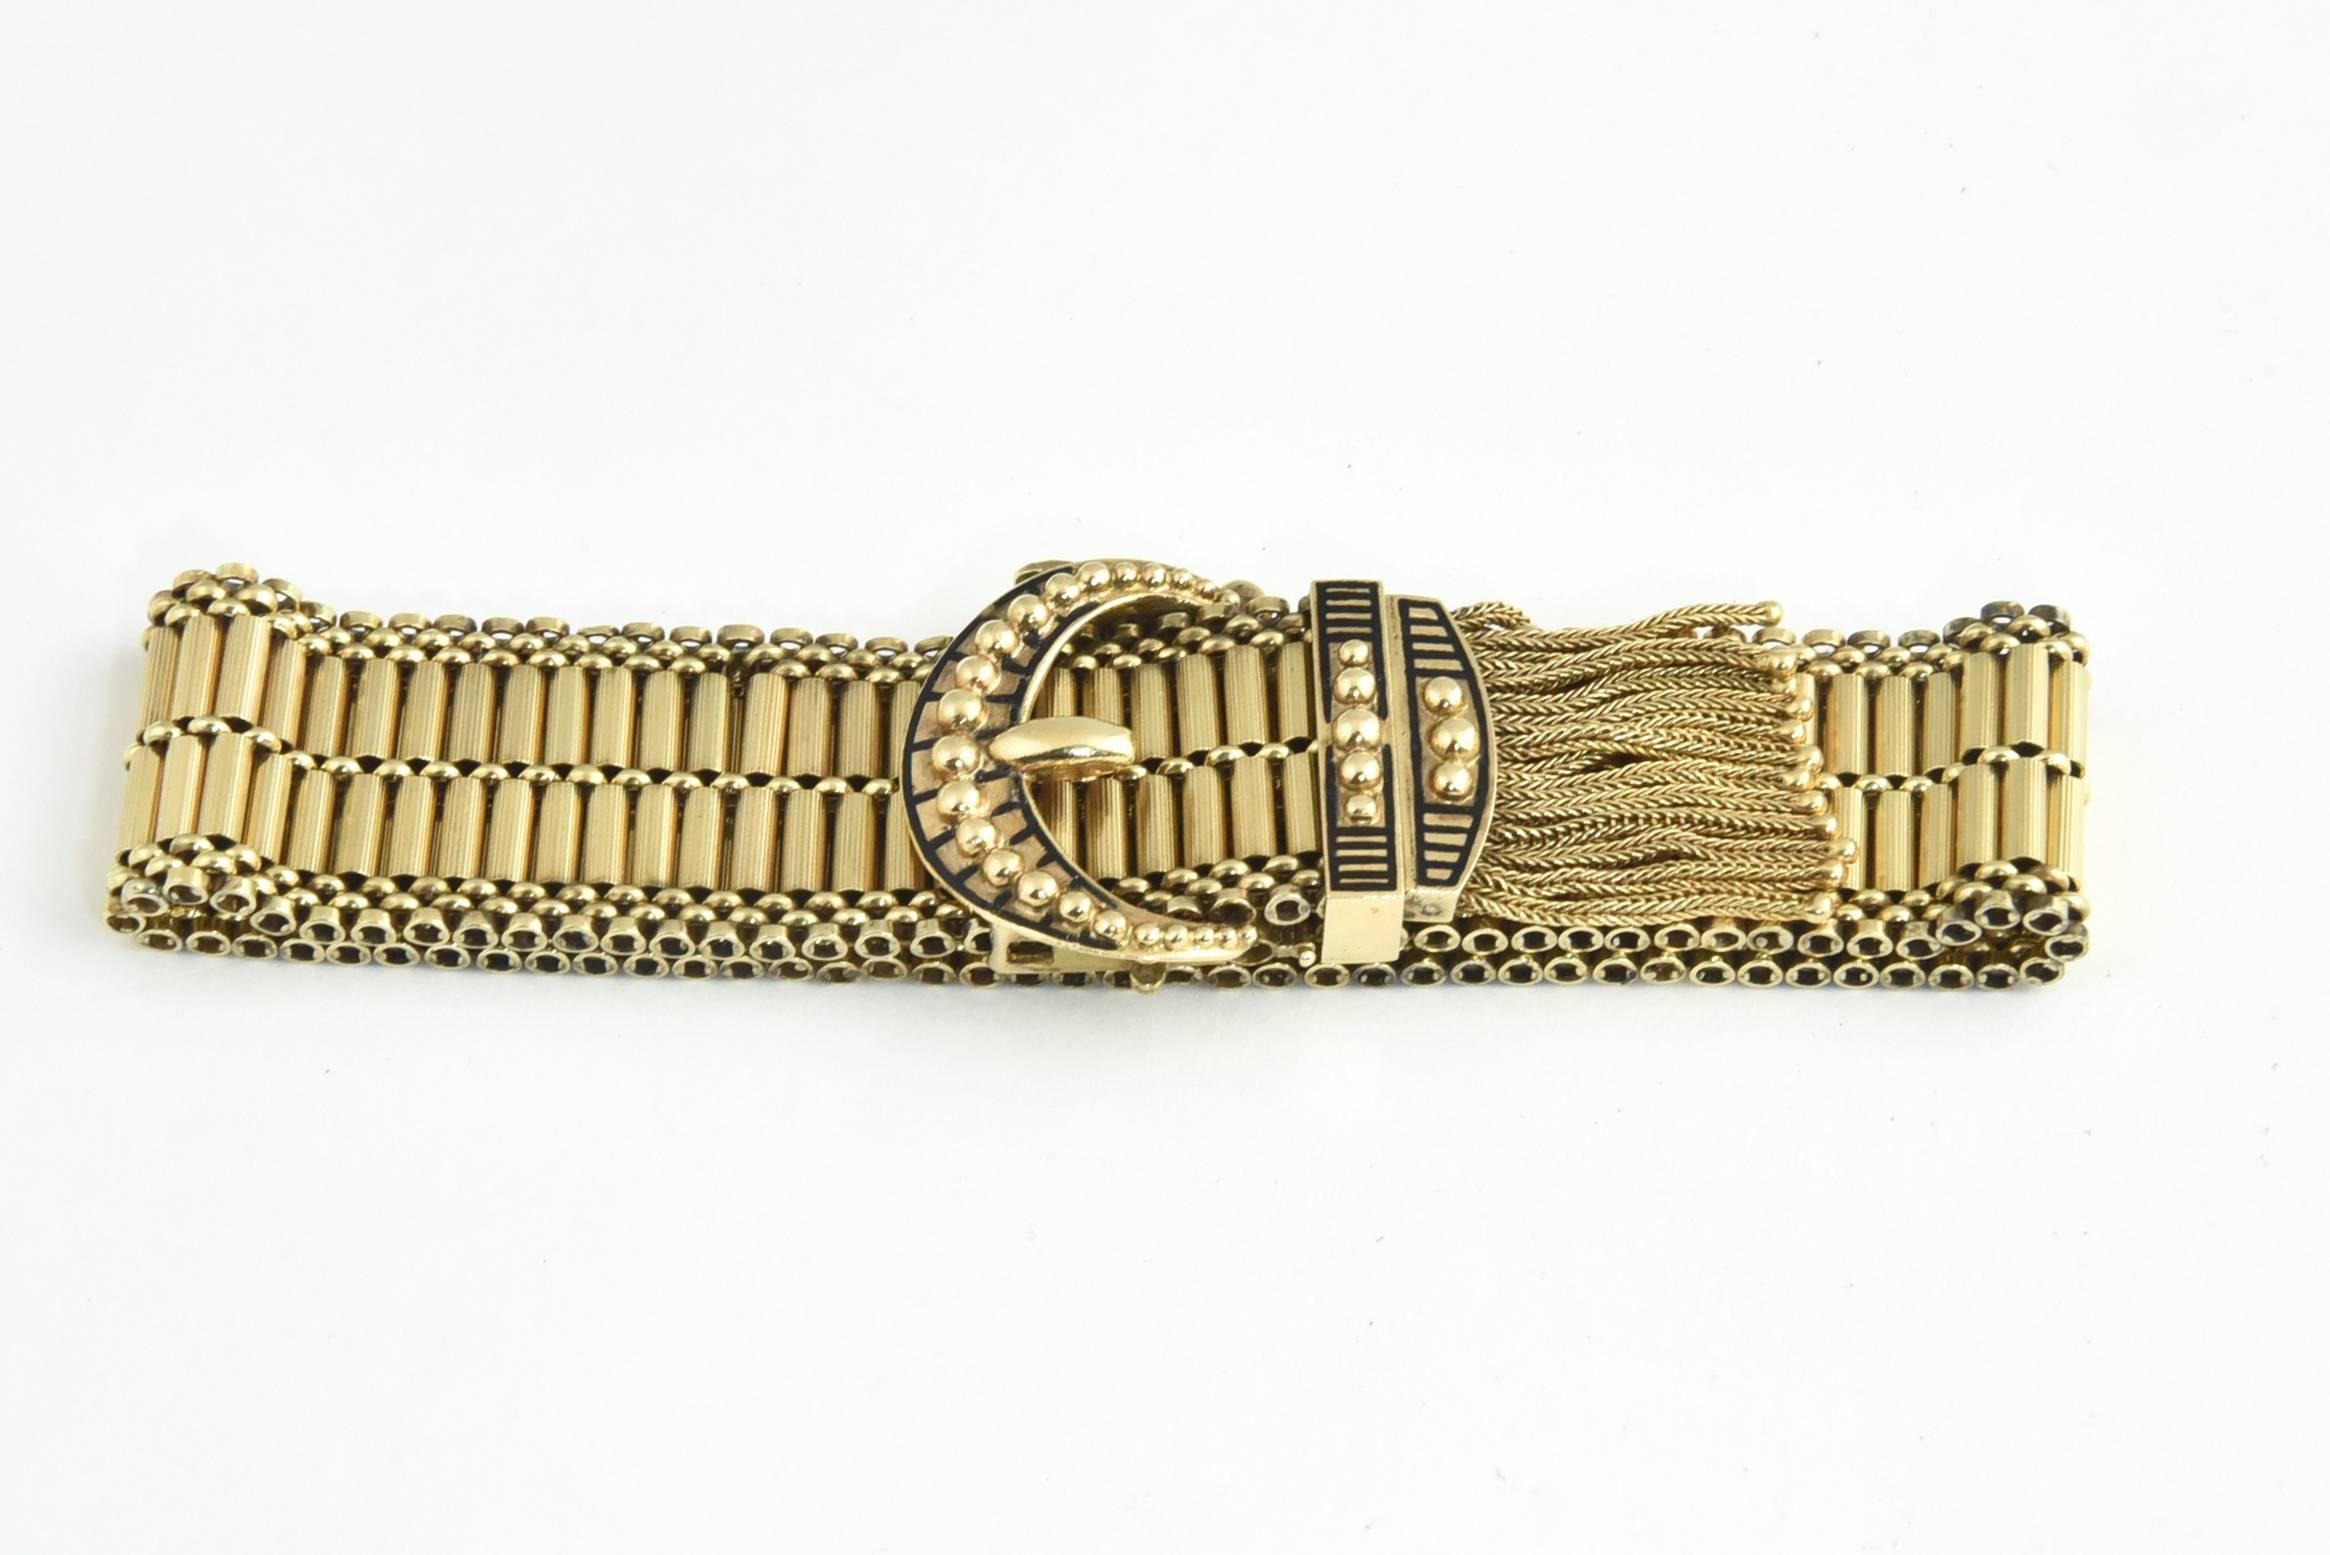 Mid Century Victorian Revival 14k gold bracelet featuring a buckle design accented with black enamel and woven gold tassels that cumulate with a gold ball.

Marked 14k.  This bracelet is extremely adjustable - it's max length would be 9